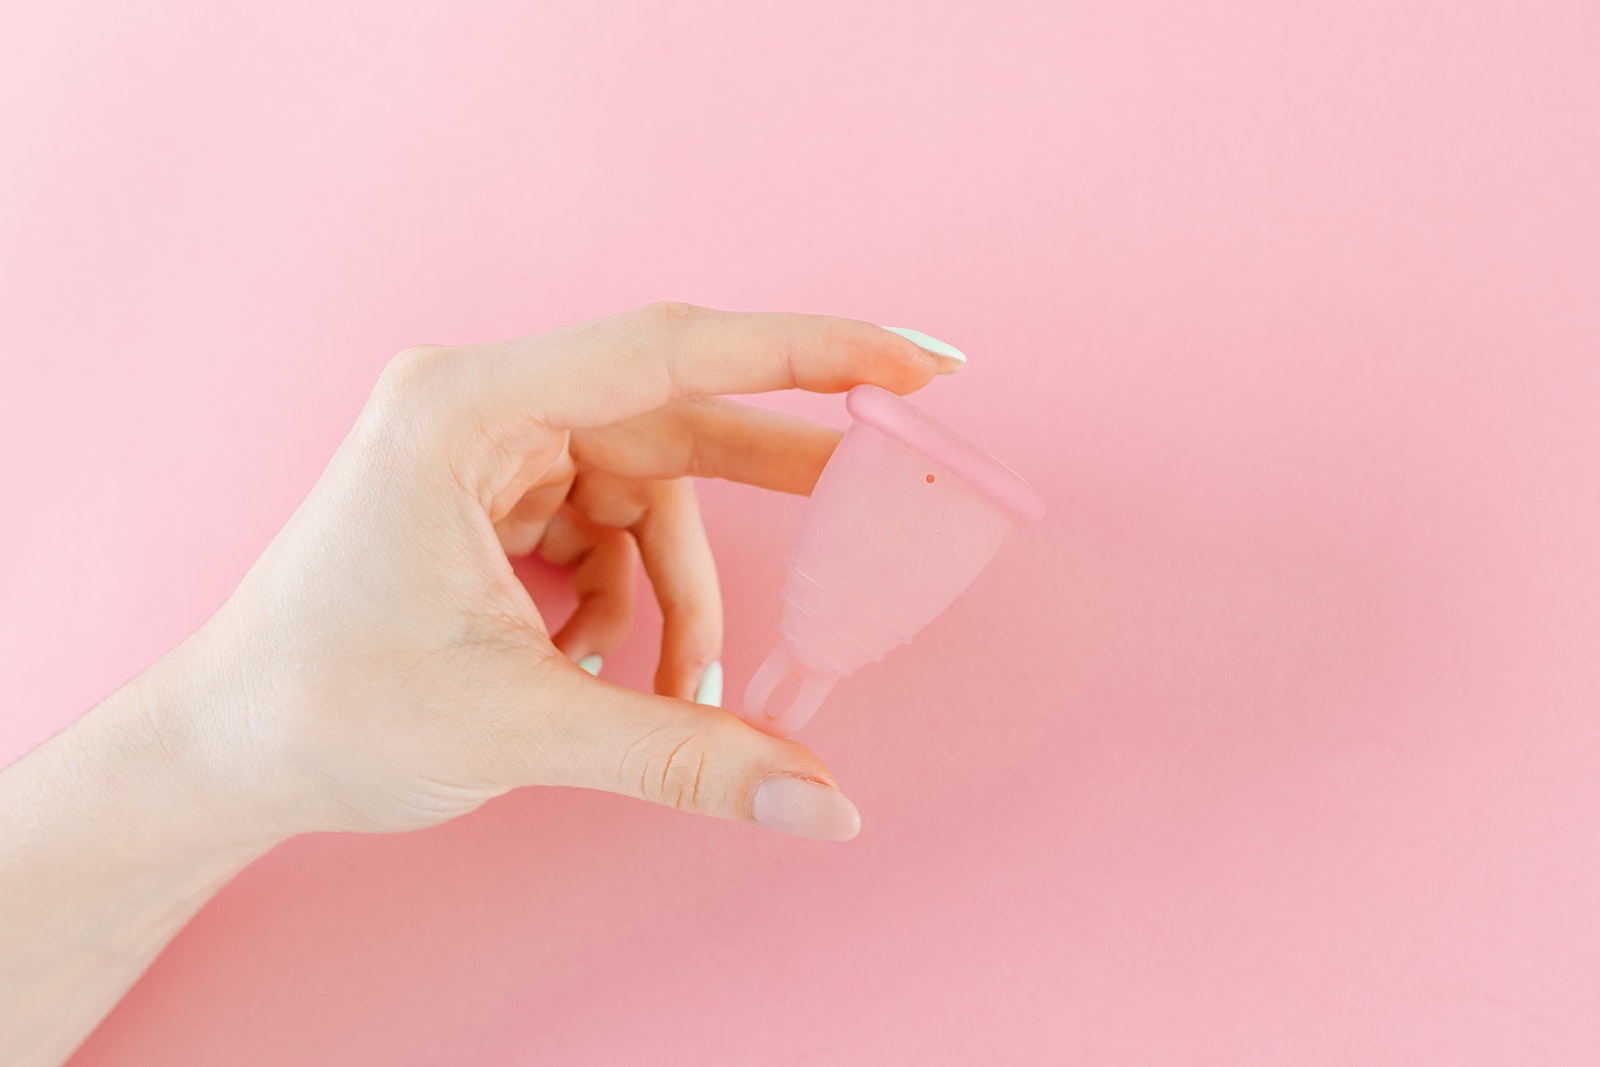 A Person Holding a Menstrual Cup